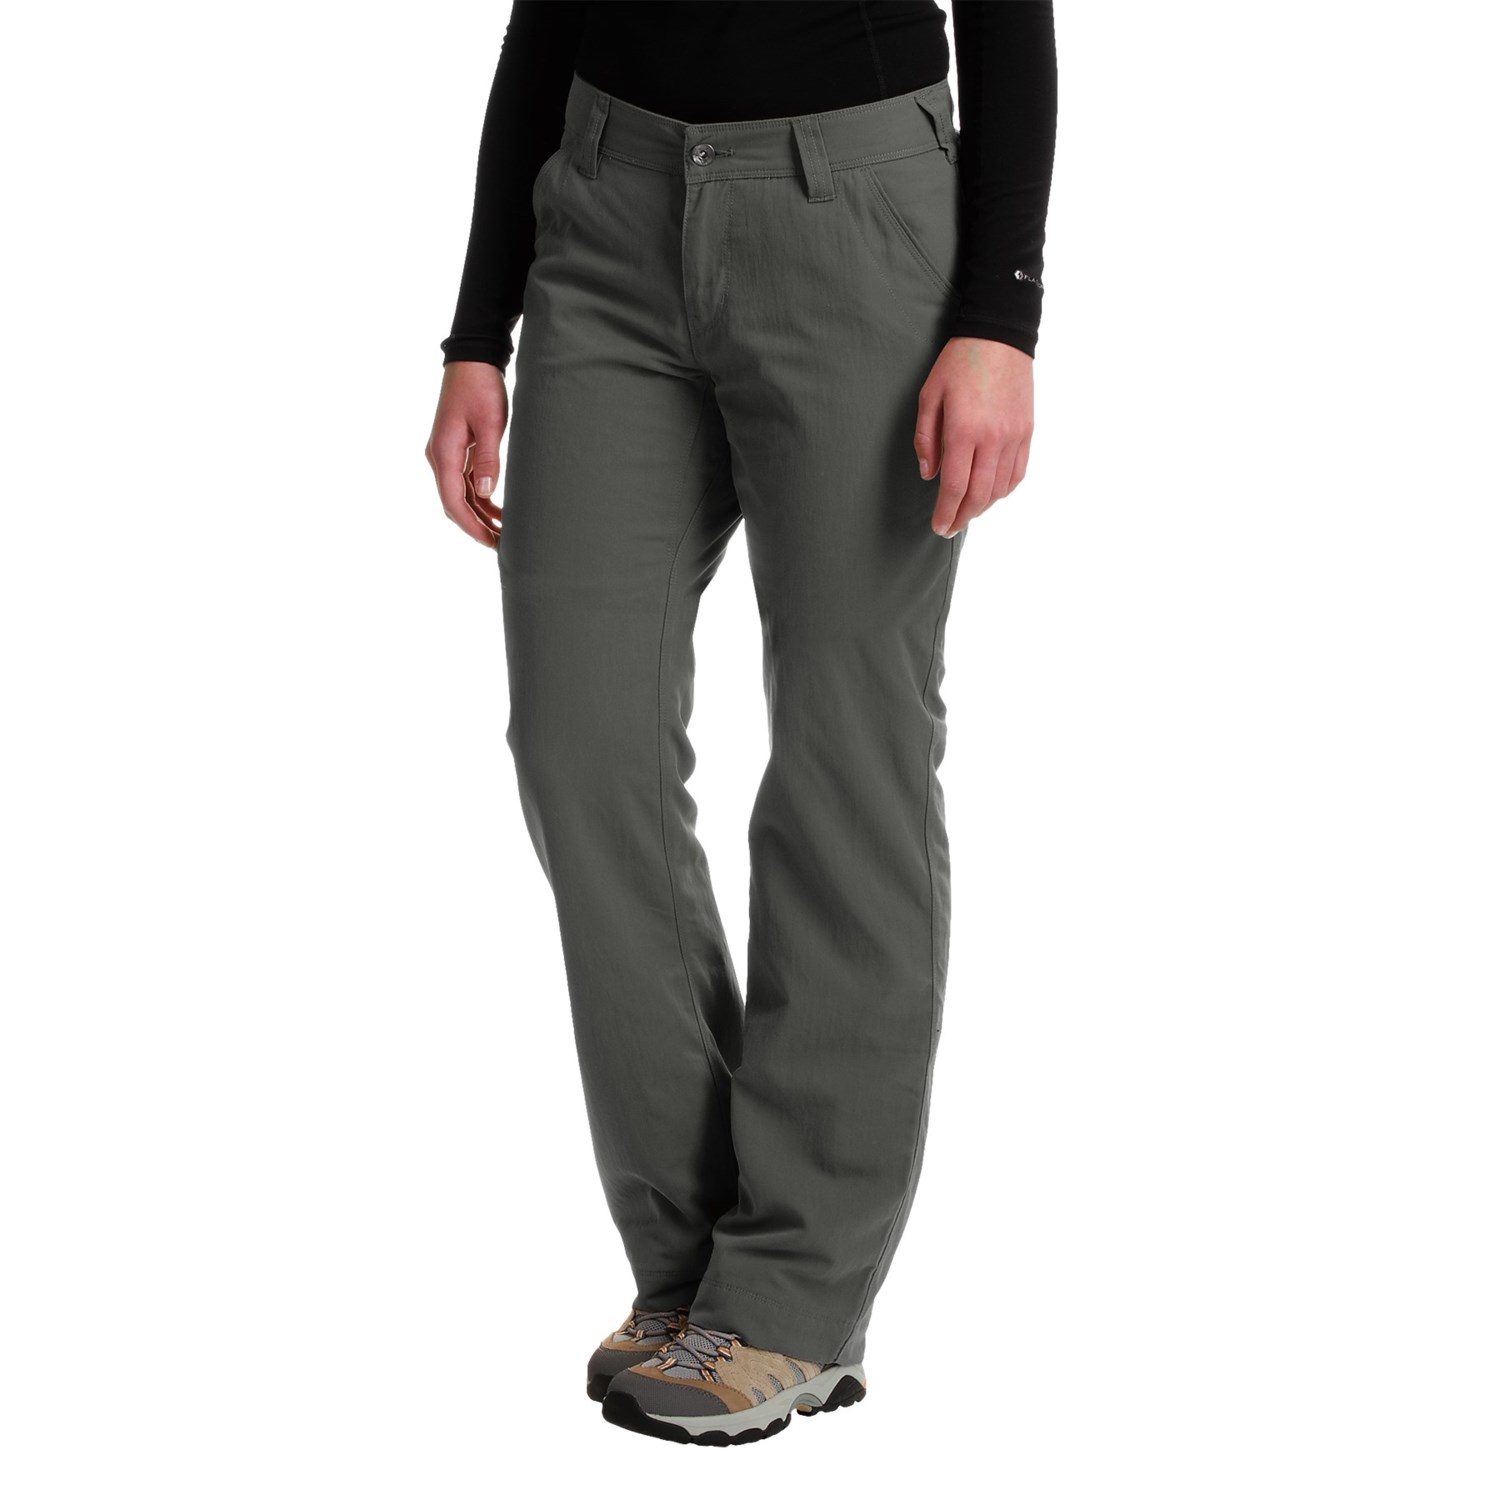 Marmot Piper Flannel-Lined Pants – UPF 50 (For Women)